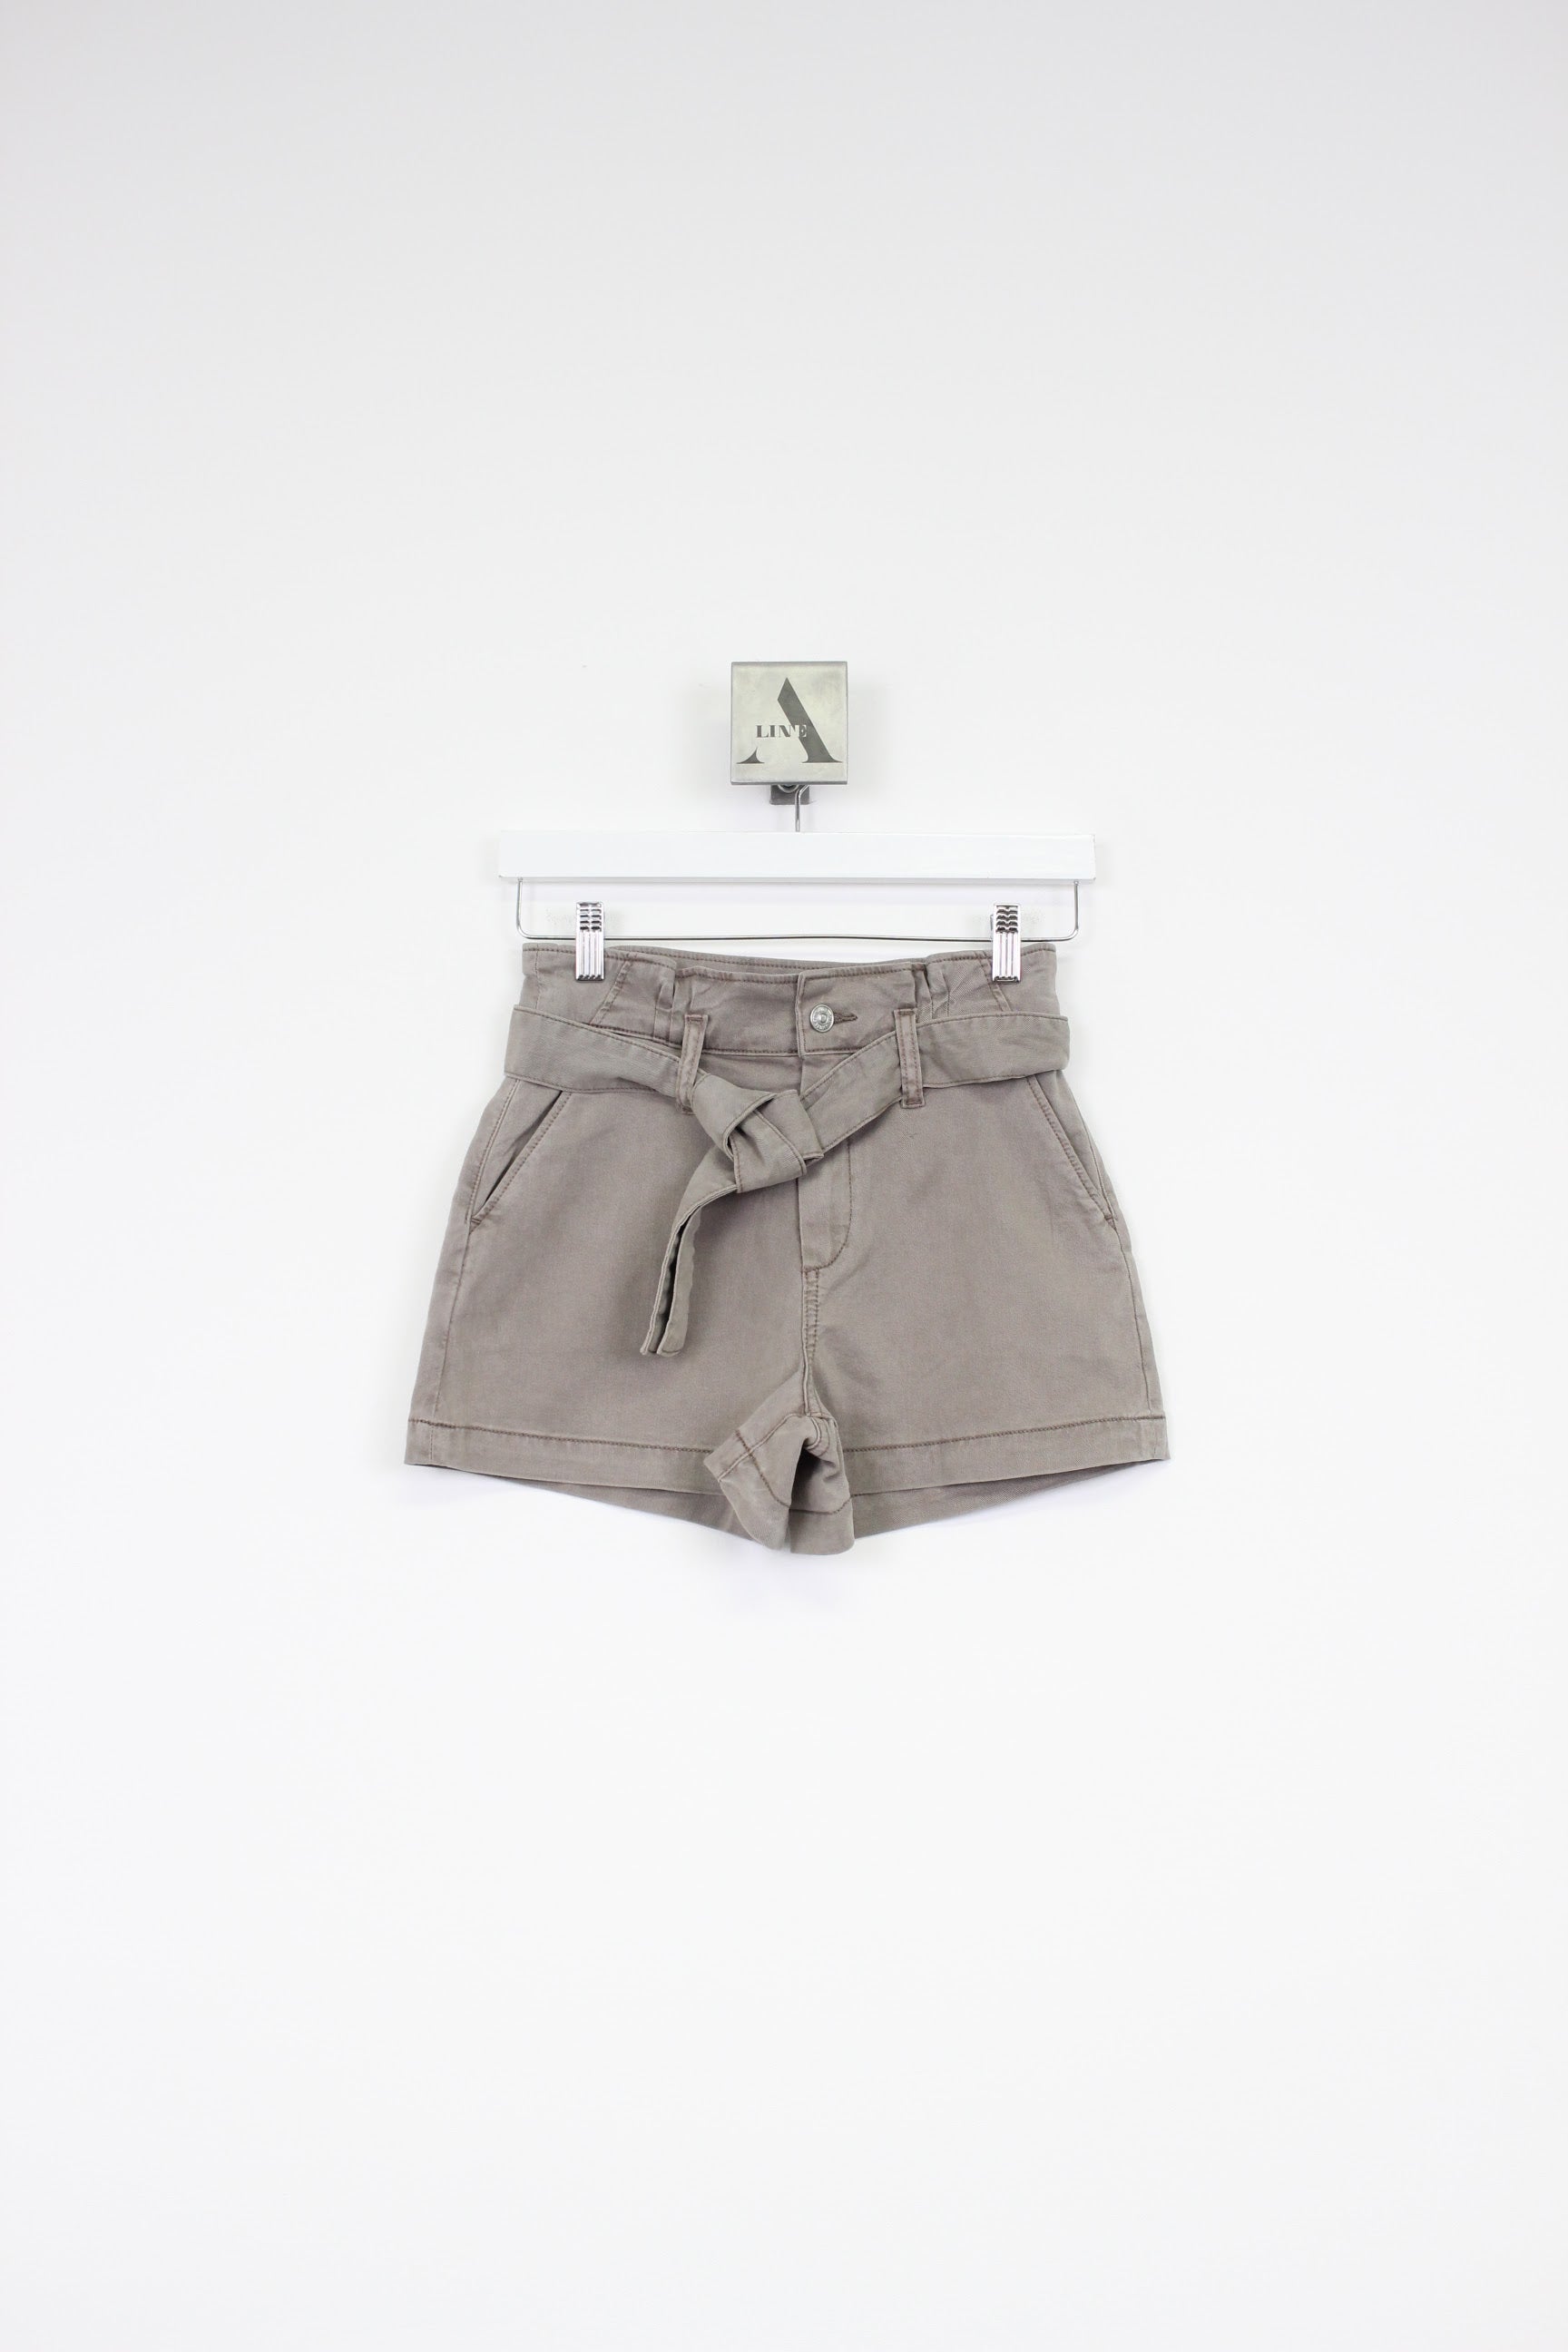 Anessa Short w/ Pleated Waistband + Tie-Vintage Moss Taupe